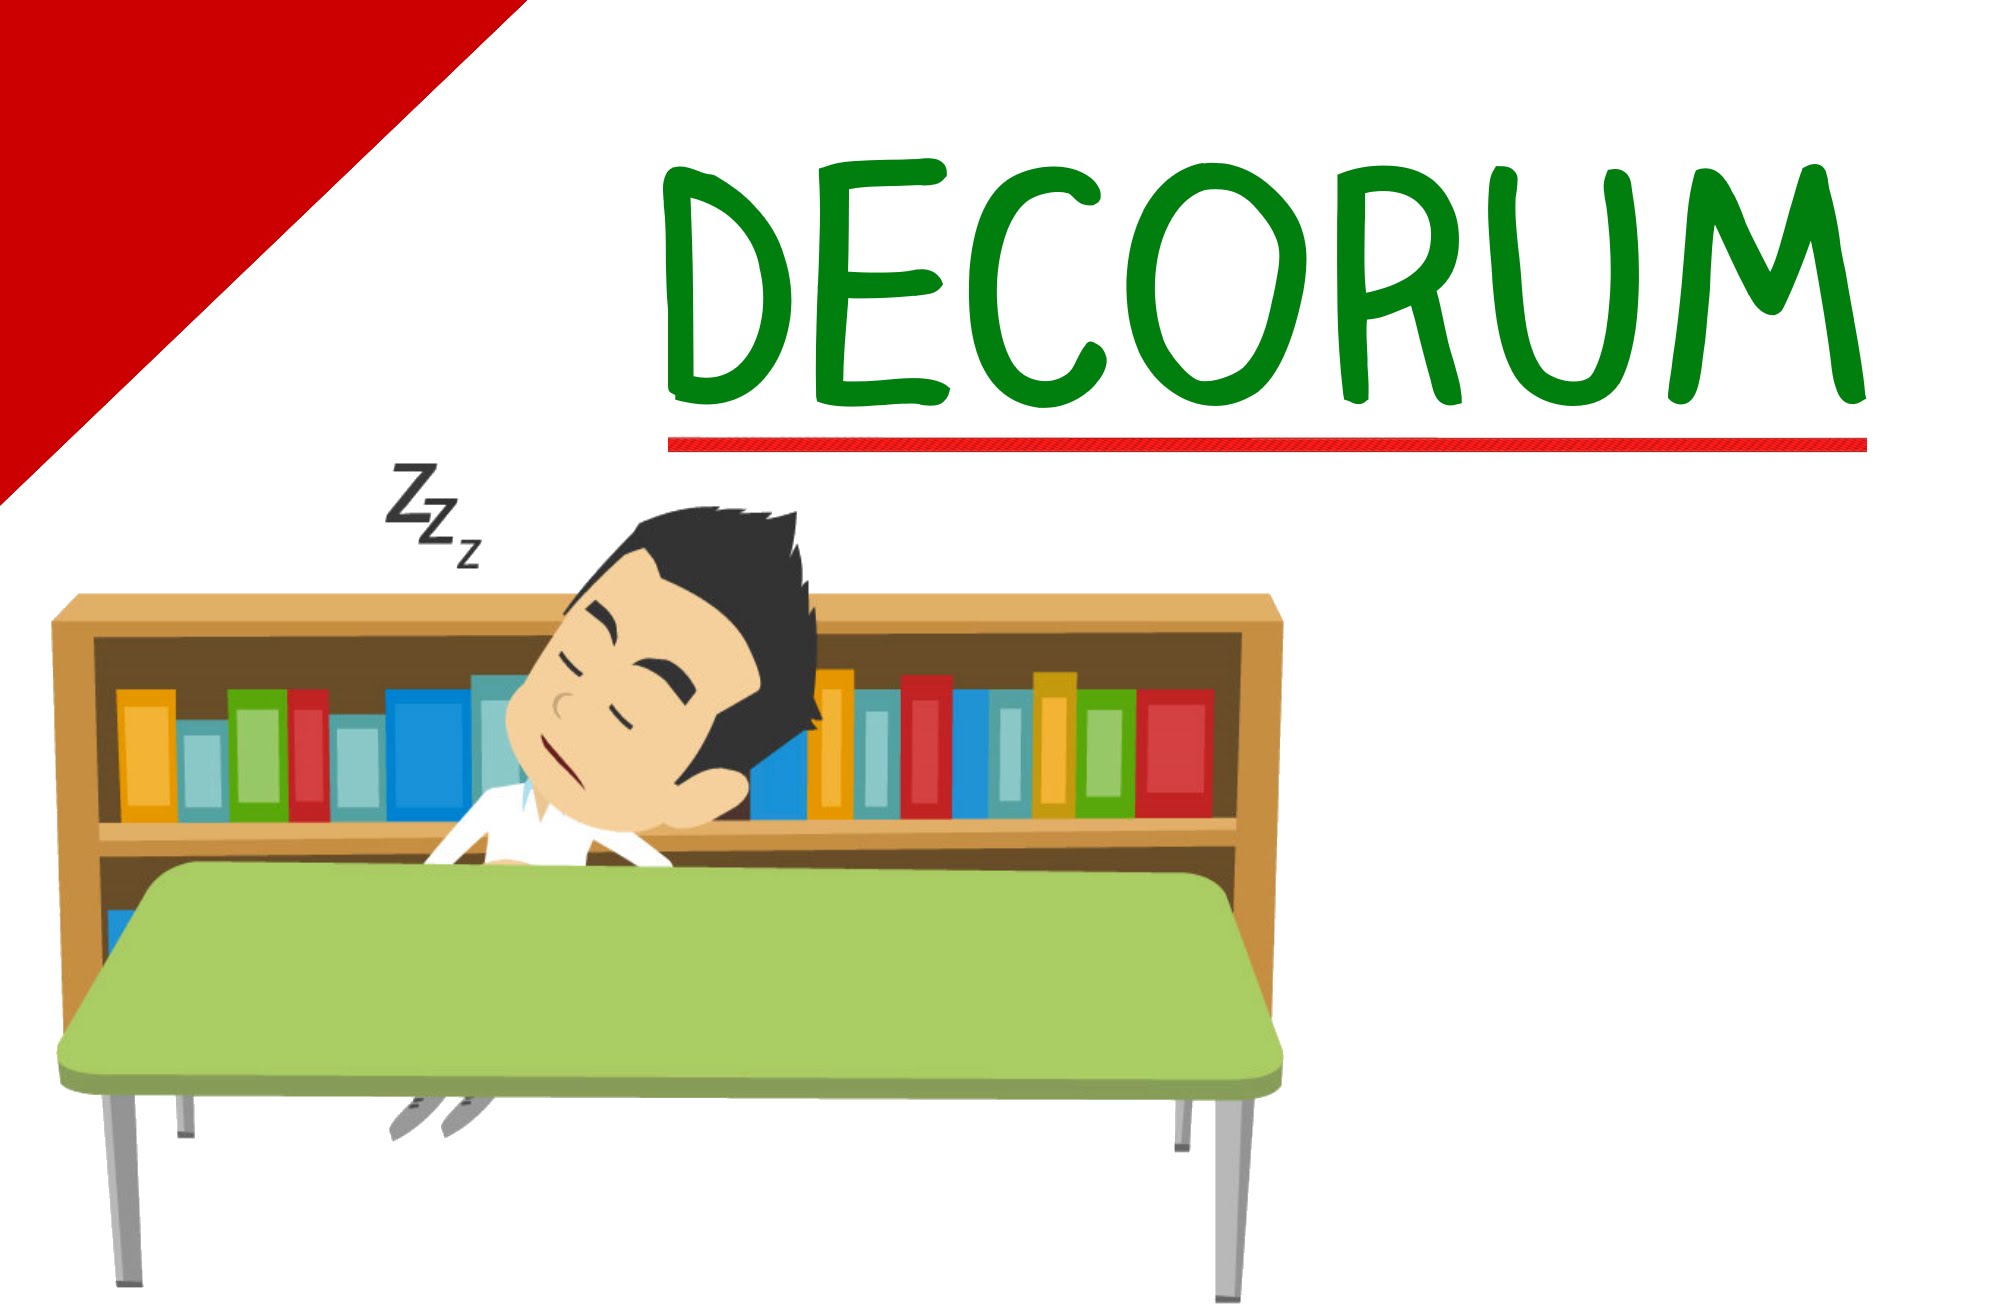 Learn English Words - Decorum - Animated Videos That Make Learning ...